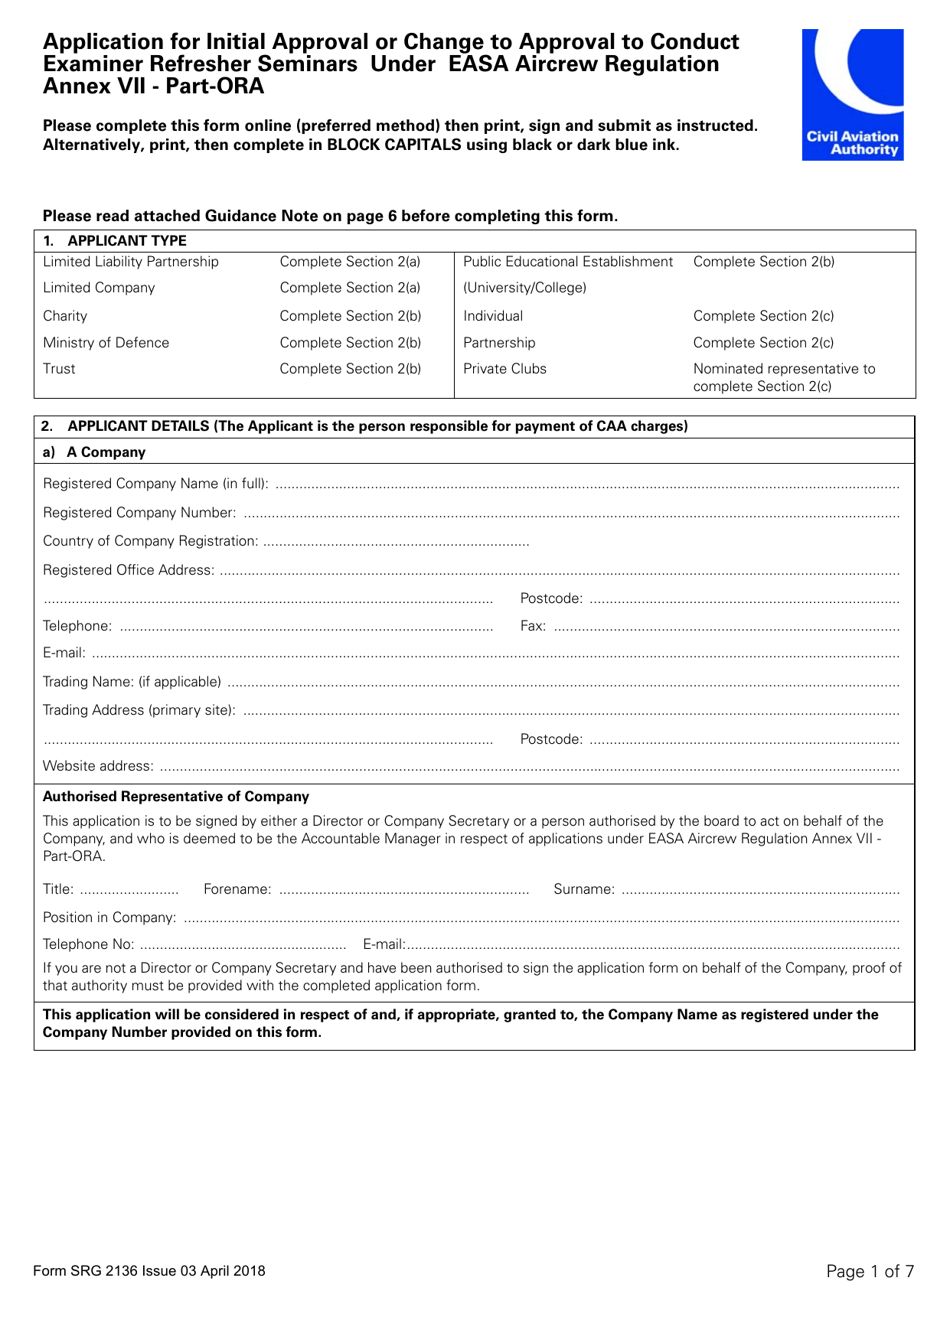 Form SRG2136 Application for Initial Approval or Change to Approval to Conduct Examiner Refresher Seminars Under Easa Aircrew Regulation Annex VII - Part-Ora - United Kingdom, Page 1